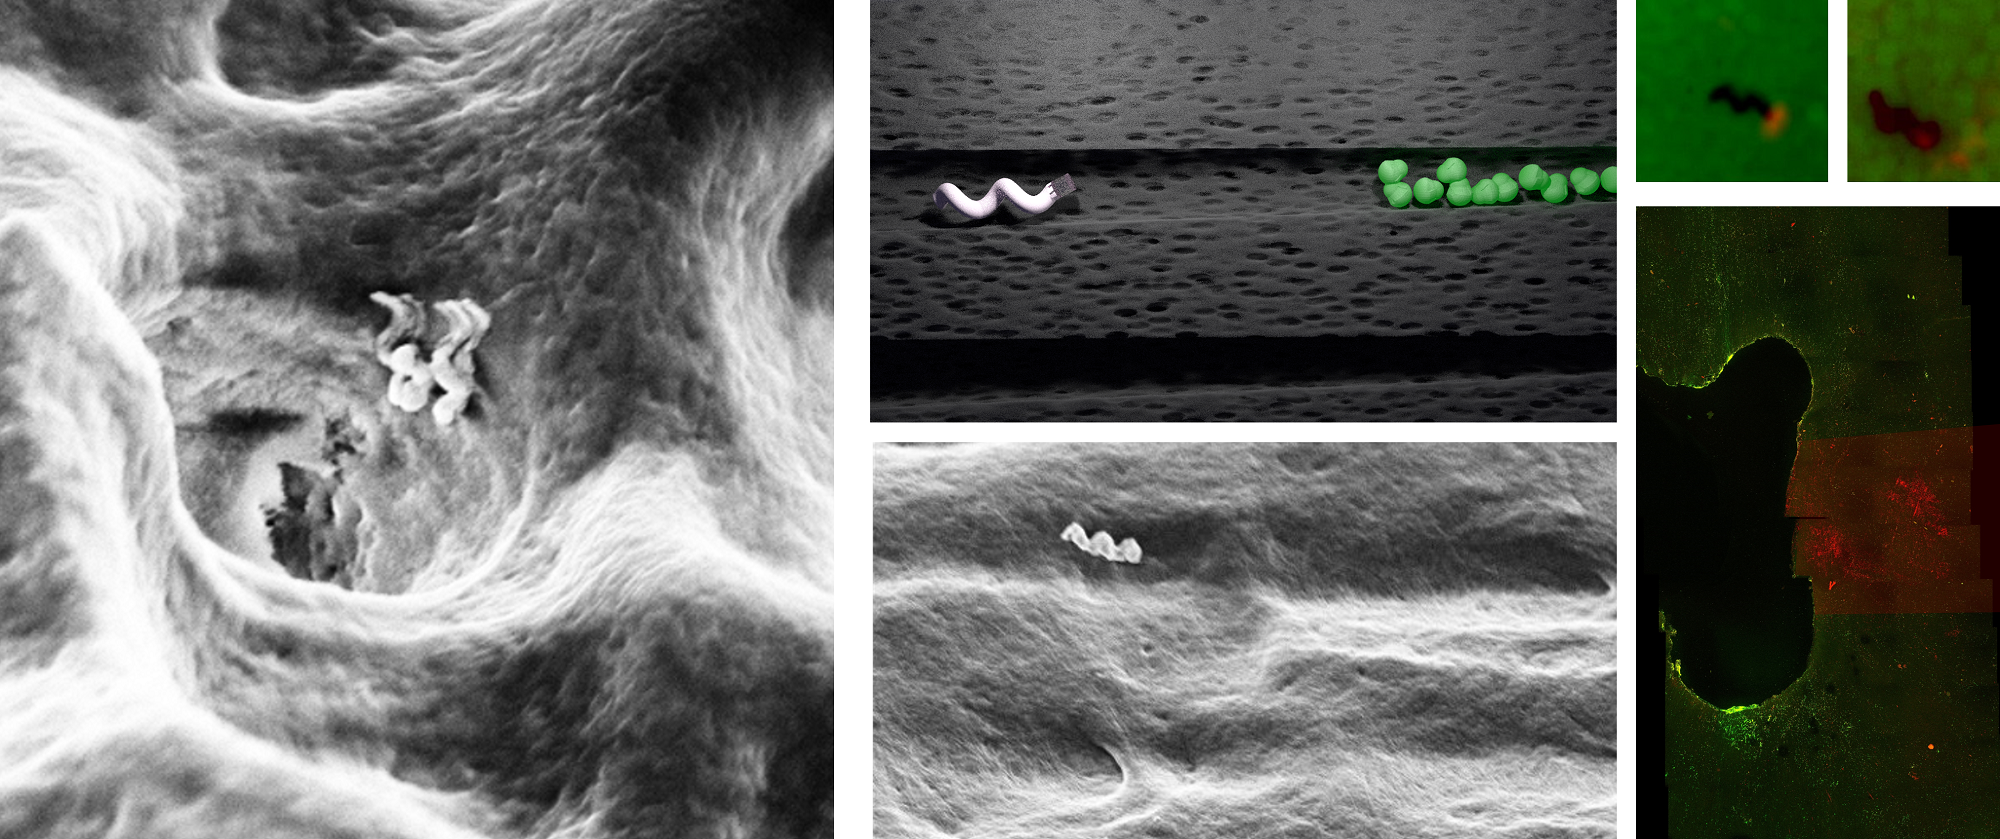 Researchers Develop Nanobots That Can Assist In Accurate Root Canal Treatments